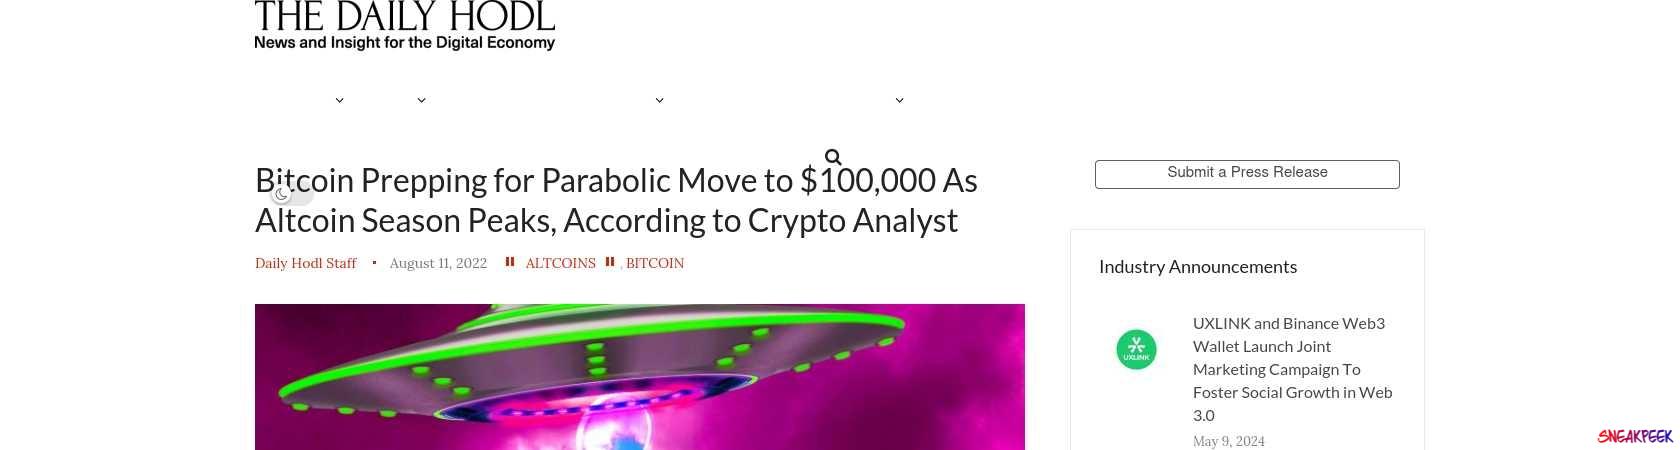 Read the full Article:  ⭲ Bitcoin Prepping for Parabolic Move to $100,000 As Altcoin Season Peaks, According to Crypto Analyst